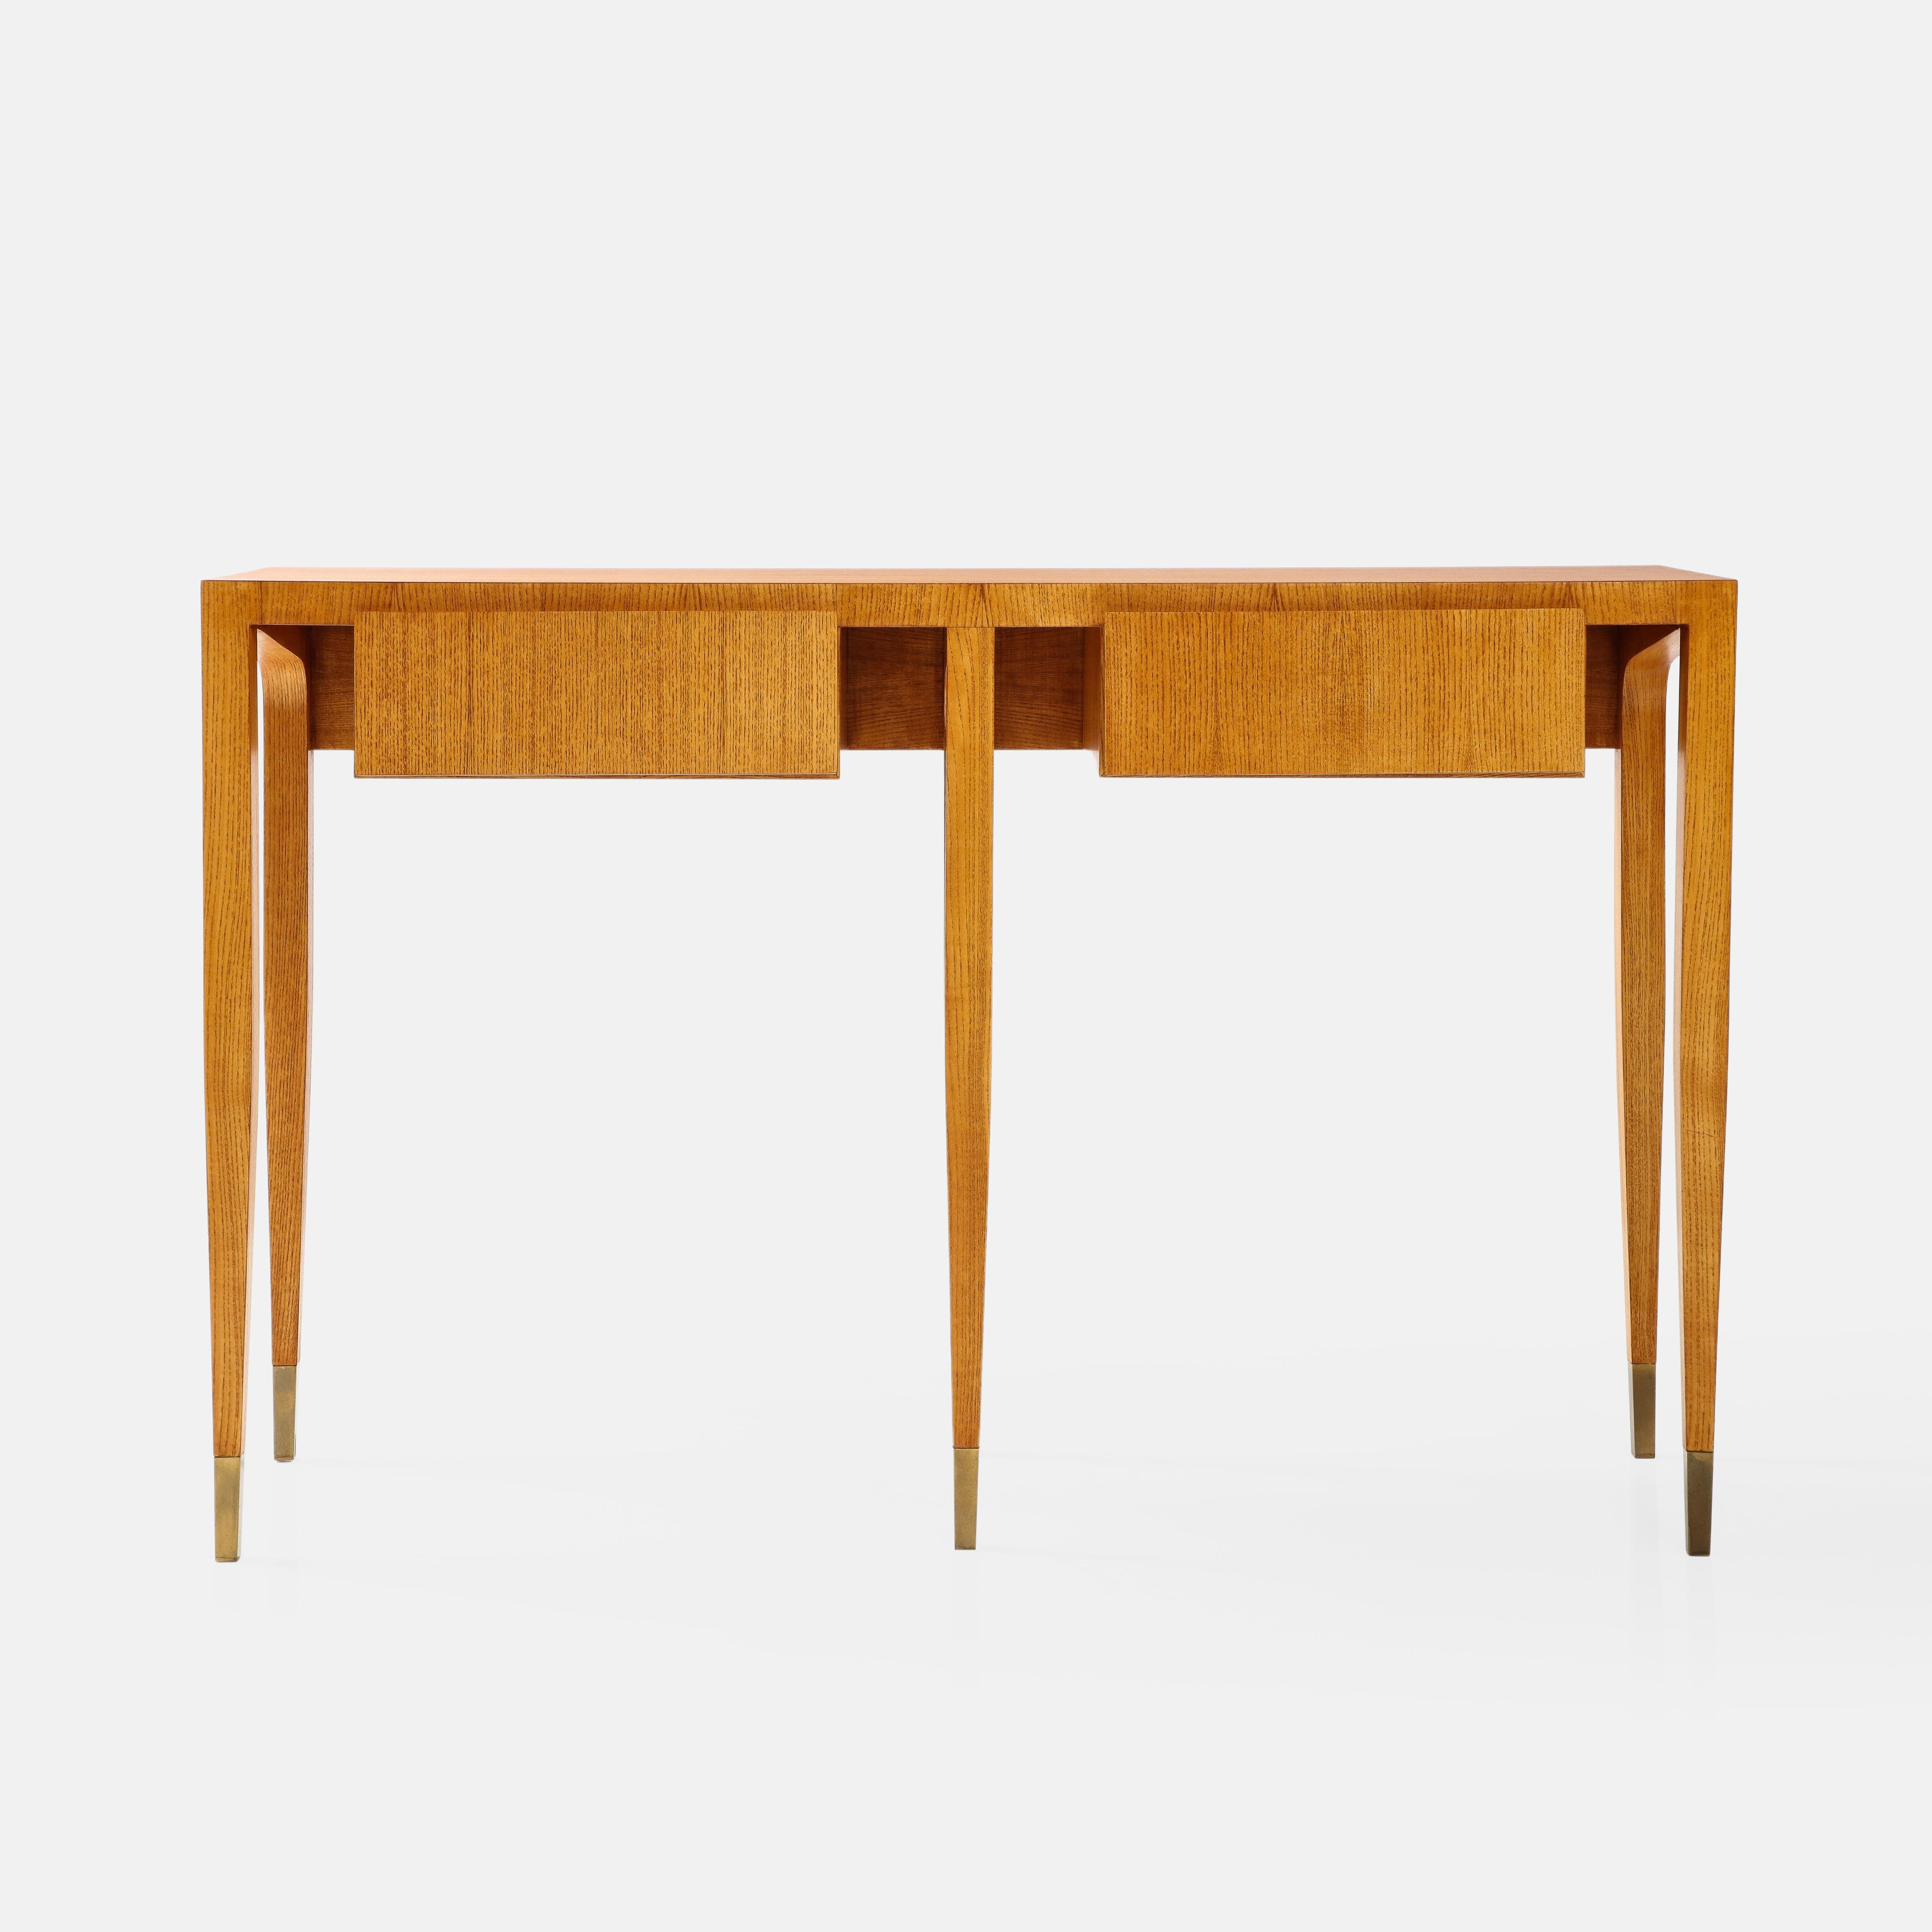 Gio Ponti for Giordano Chiesa Rare Pair of Ash Wood Consoles, Italy, 1950s For Sale 7